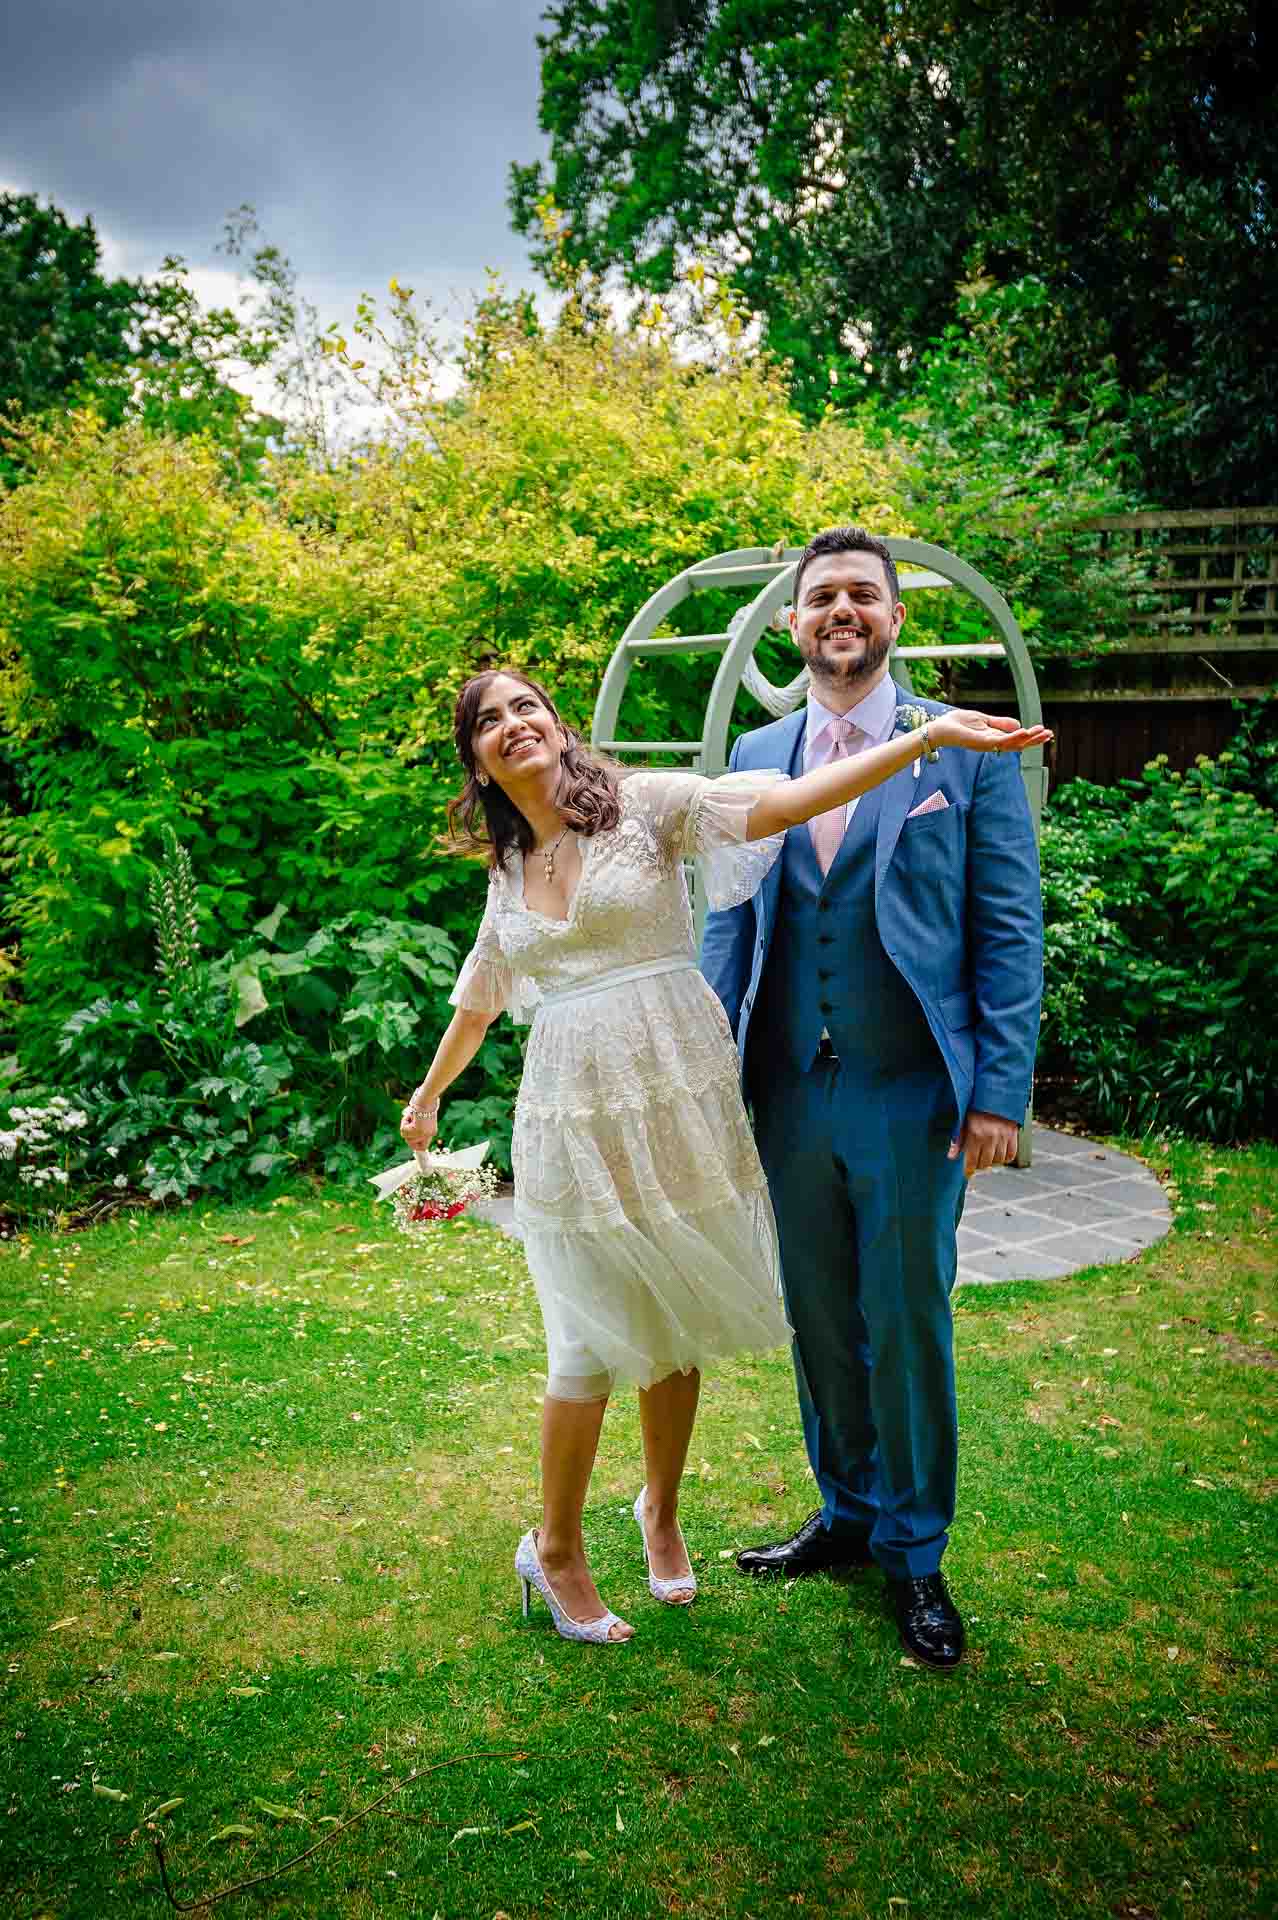 Bride messing about with groom in London garden